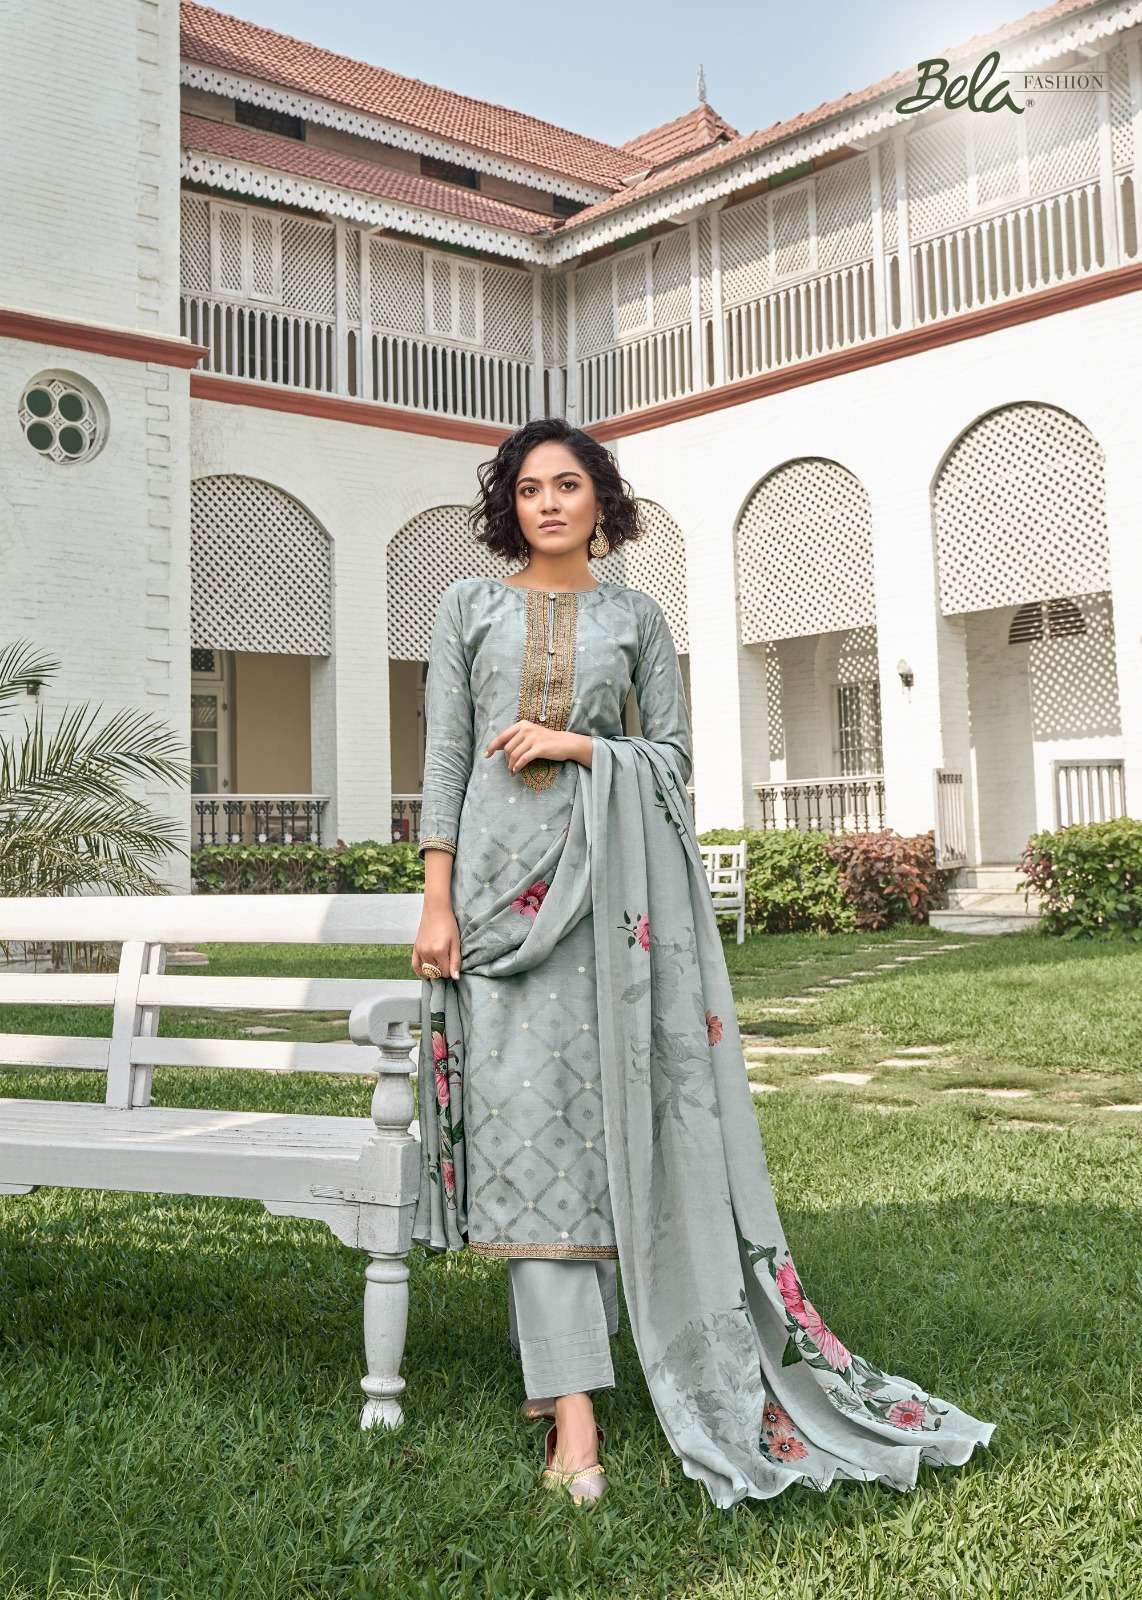 Mahiraah By Bela Fashion 3852 To 3858 Series Beautiful Festive Suits Colorful Stylish Fancy Casual Wear & Ethnic Wear Pure Muslin Jacquard Dresses At Wholesale Price